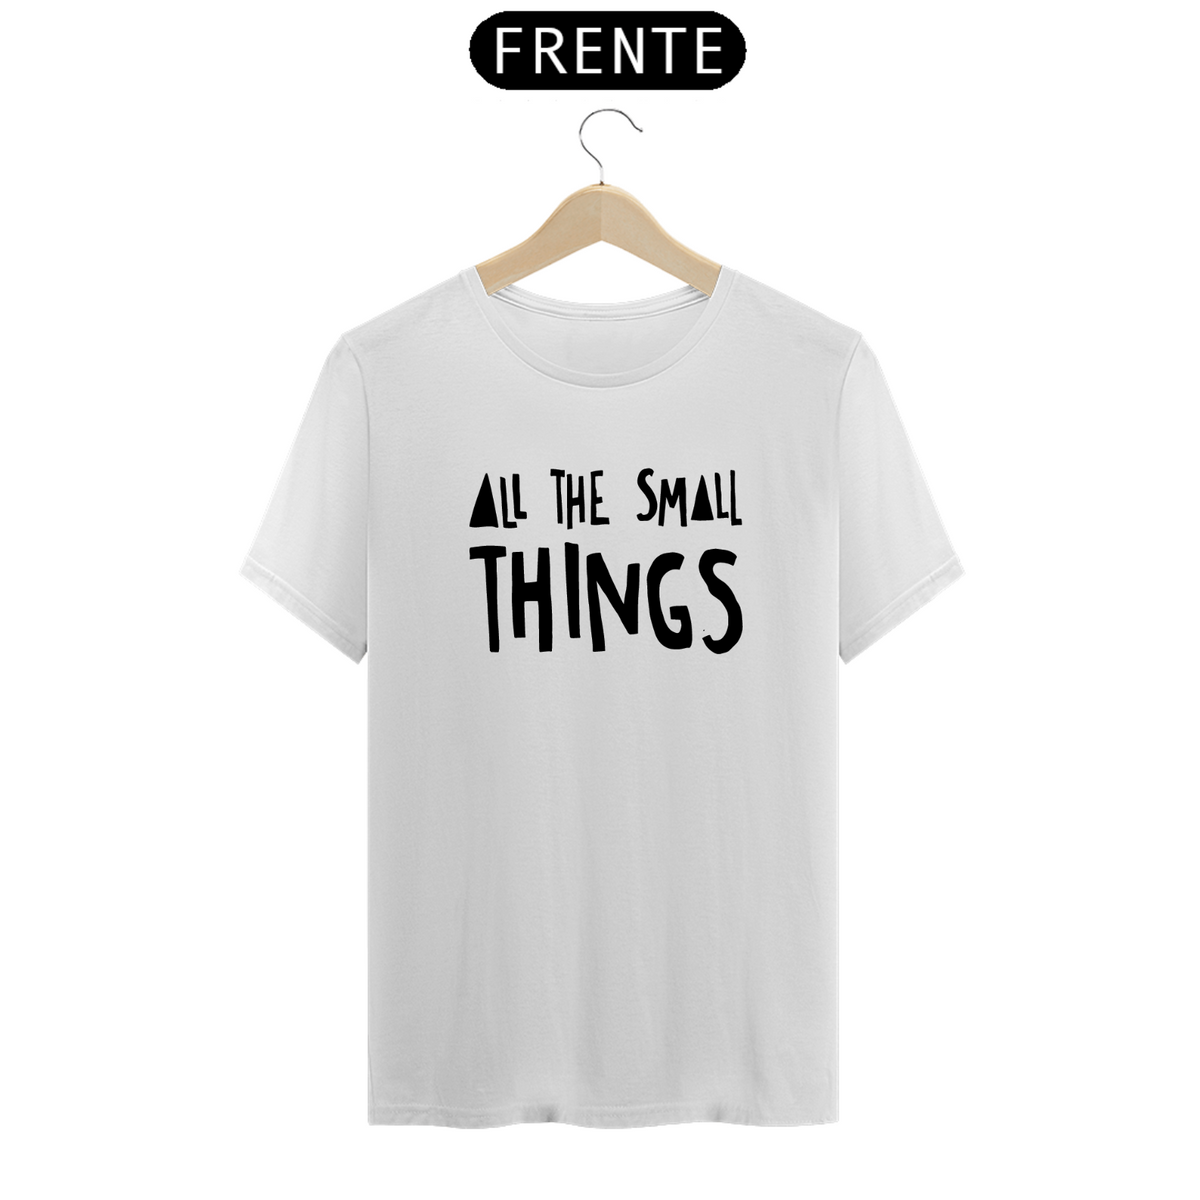 Nome do produto: Camiseta Unissex - Blink 182 All The Small Things